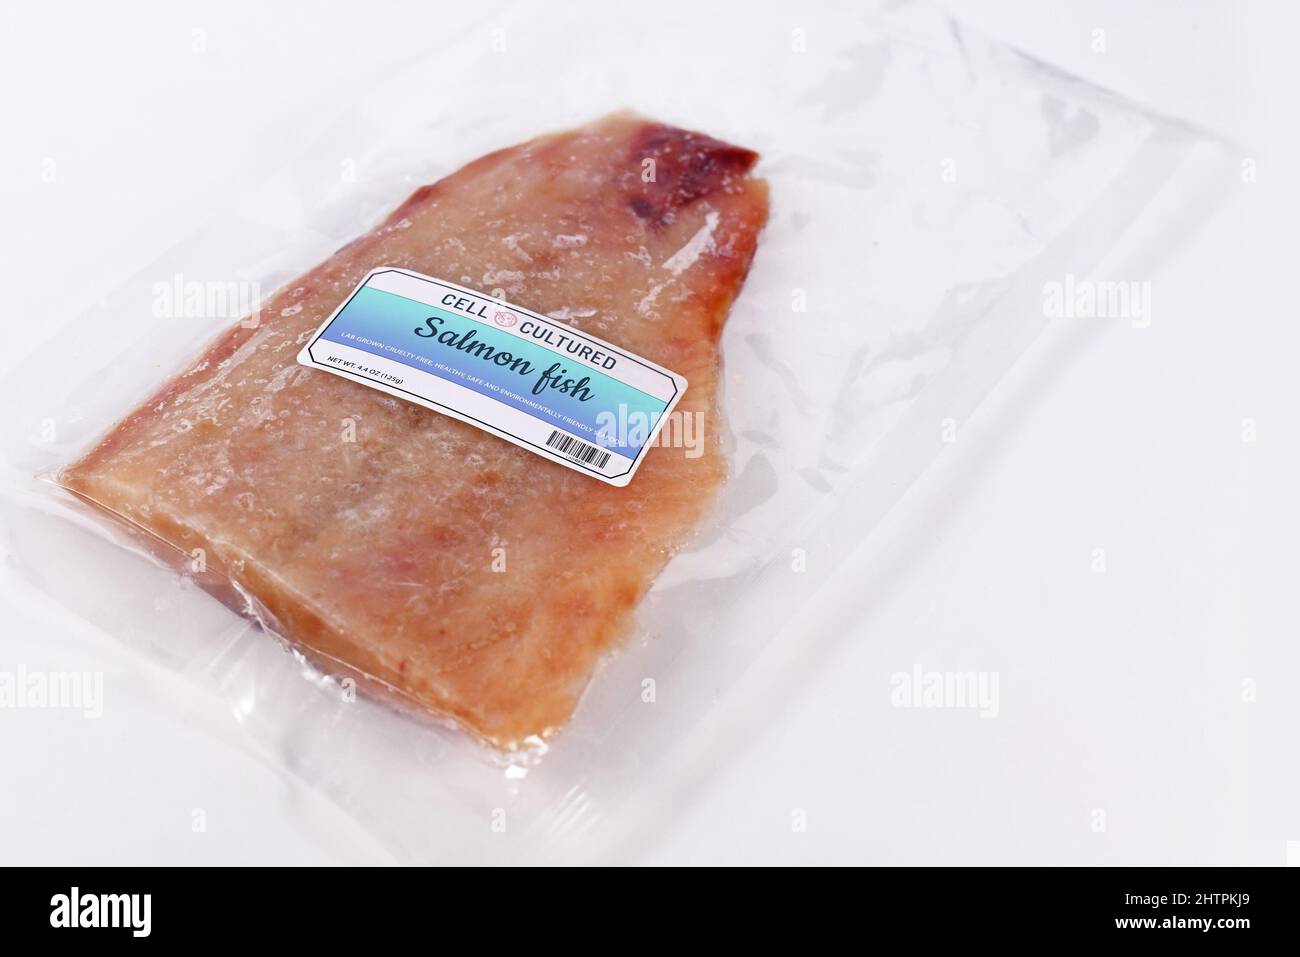 Lab grown cell cultured salmon fish concept for artificial in vitro seafood production with frozen packed raw fish with made up label Stock Photo